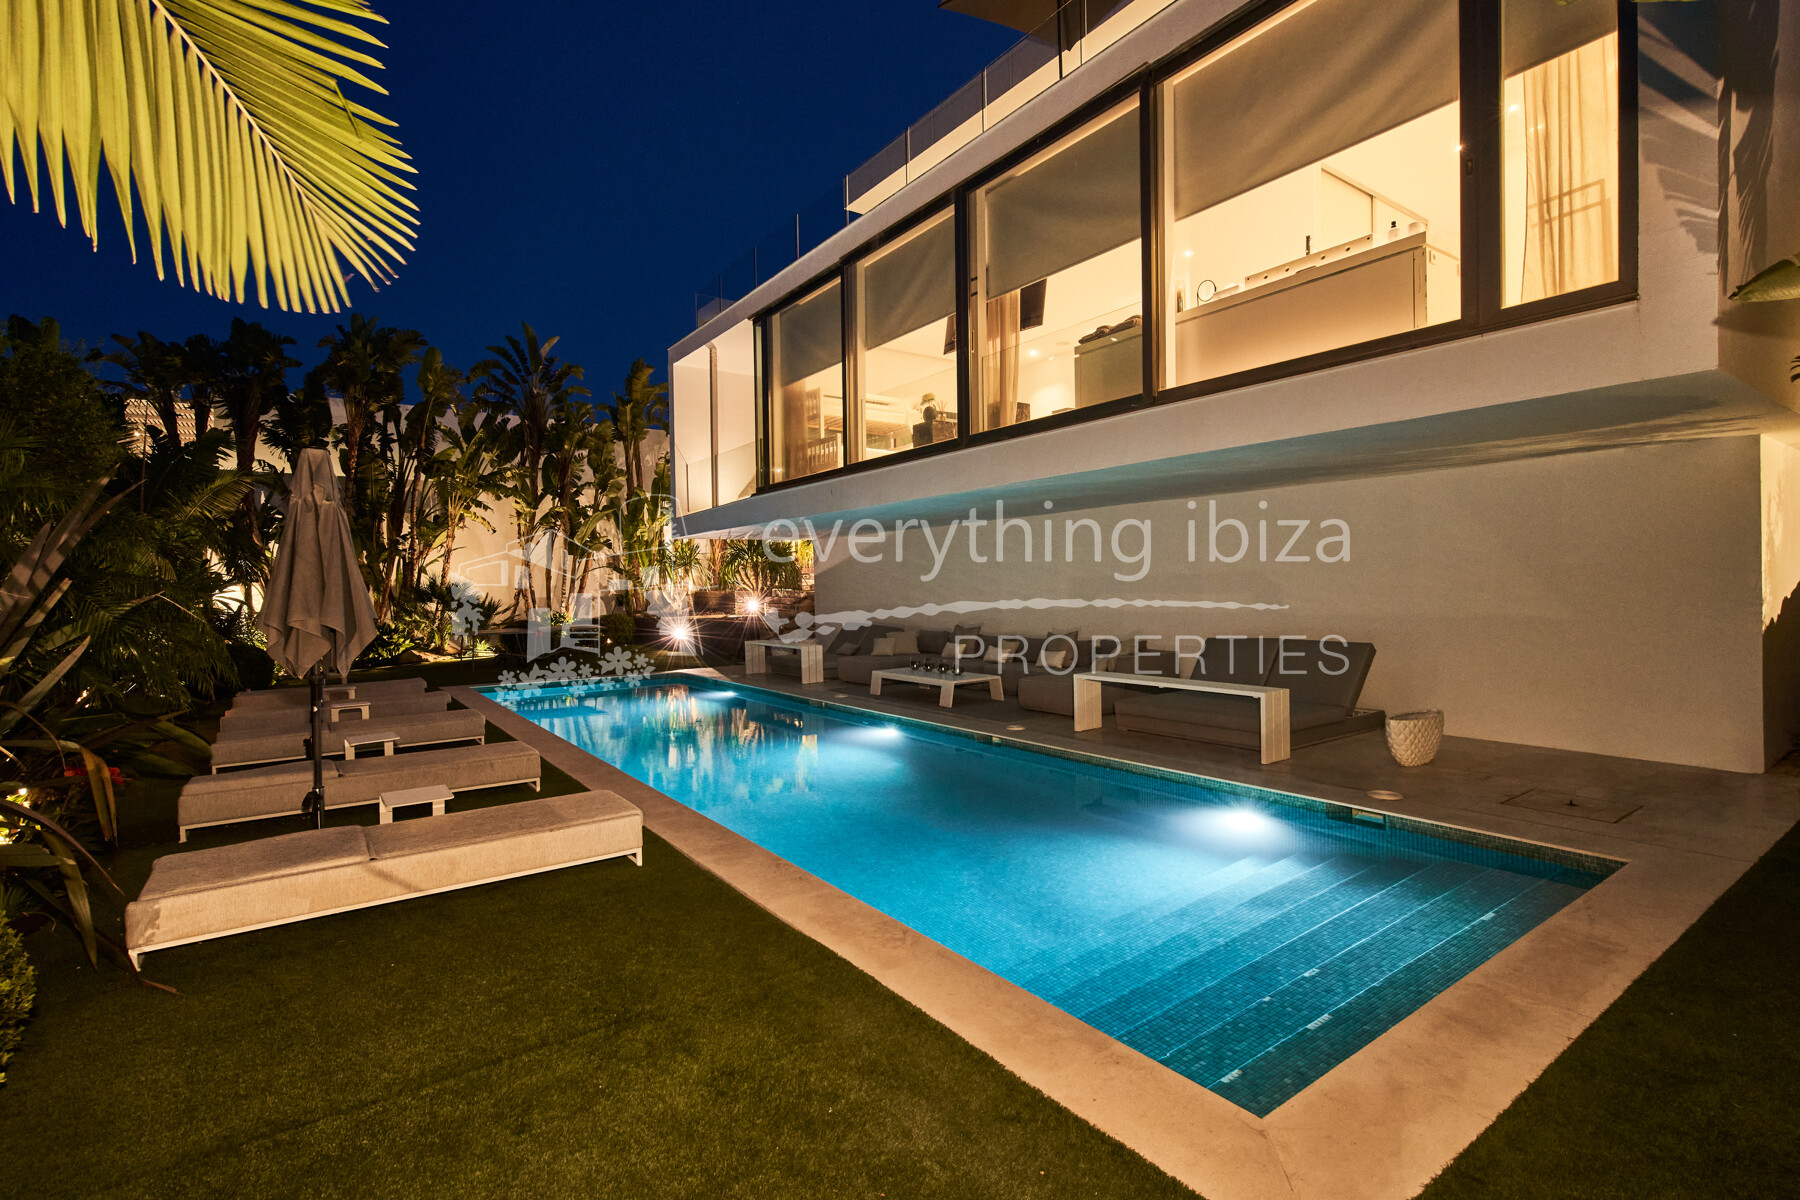 Exquisite Cosmopolitan Detached Villa of the Finest Quality & Design, ref. 1633, for sale in Ibiza by everything ibiza Properties